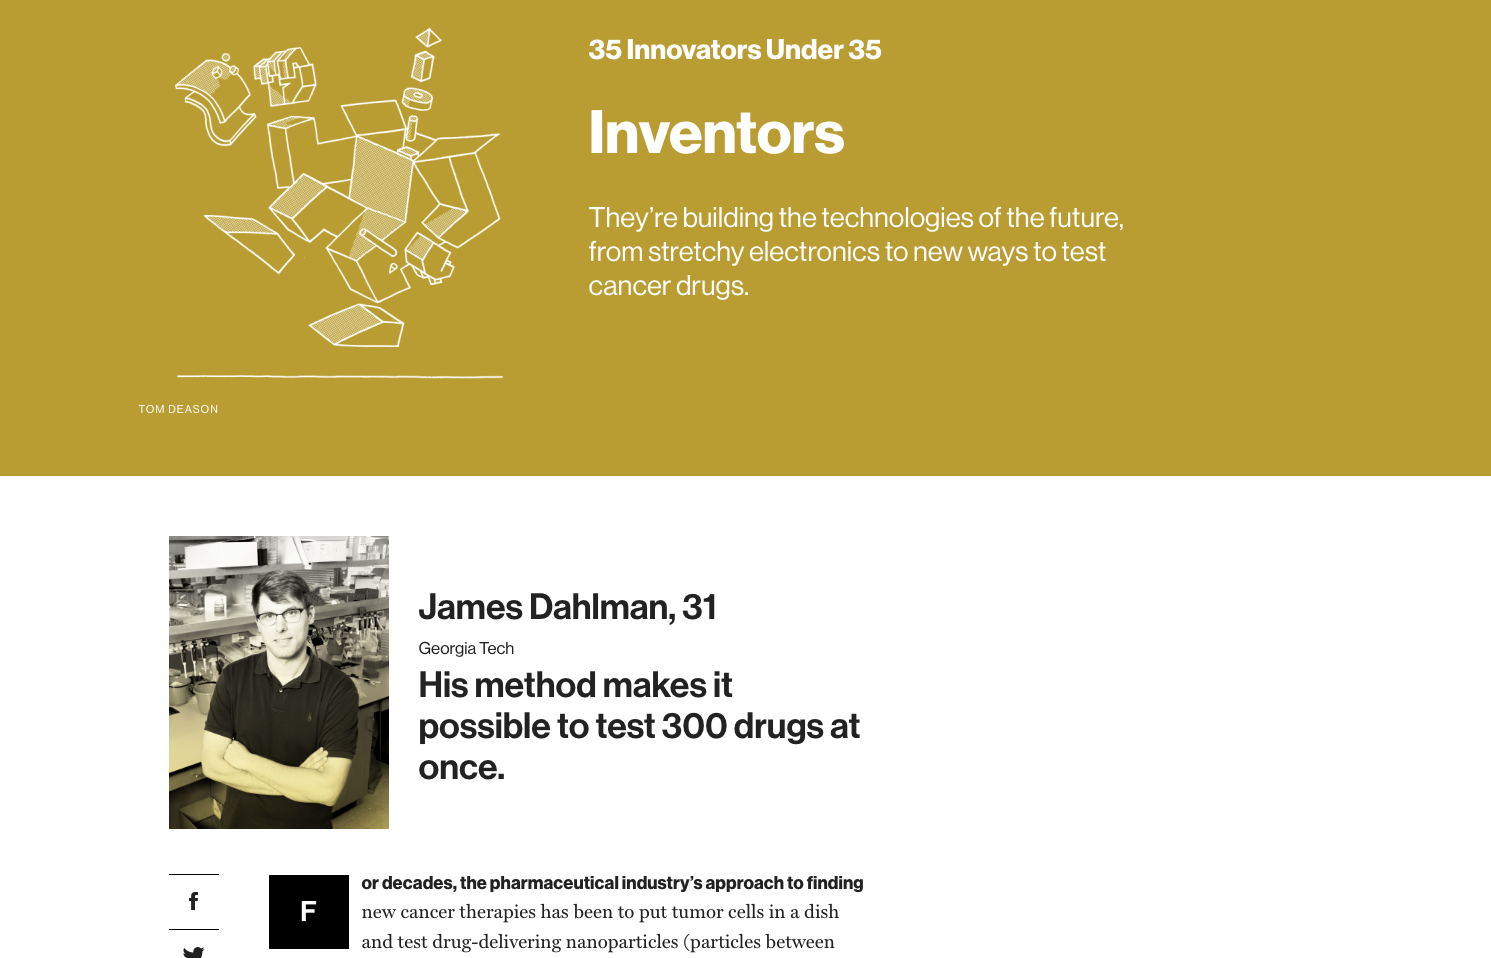 MIT Technology Review's "35 Innovators Under 35" applauded James Dahlman as a great inventor in its 2018 annual edition. Dahlman is synonymous with DNA-barcoding at Georgia Tech. The method tests hundreds of drug-delivering nanoparticles at once in vivo. Credit: MIT Technology Review